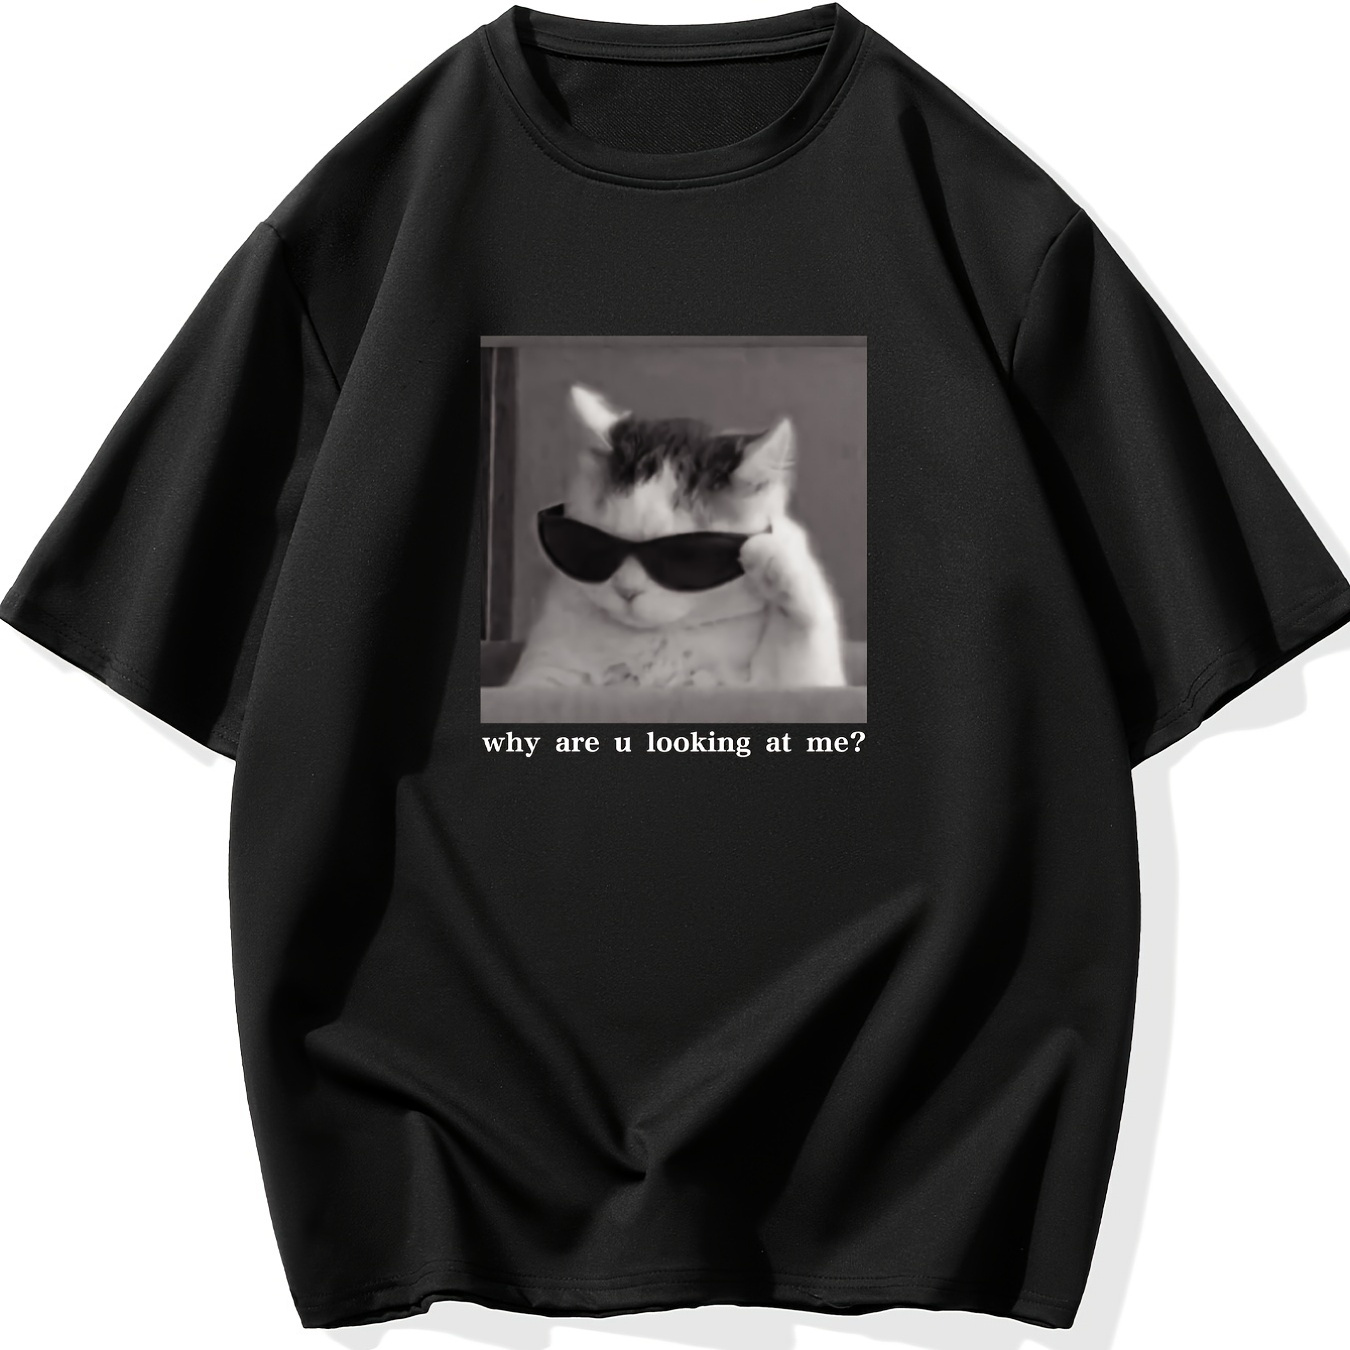 

Men's Plus Size 'why Are U Looking At Me' Funny Cat Print Stretch T-shirt, Oversized Short Sleeve Tops For Spring Summer, Causal Loose Clothing For Big And Tall Guys